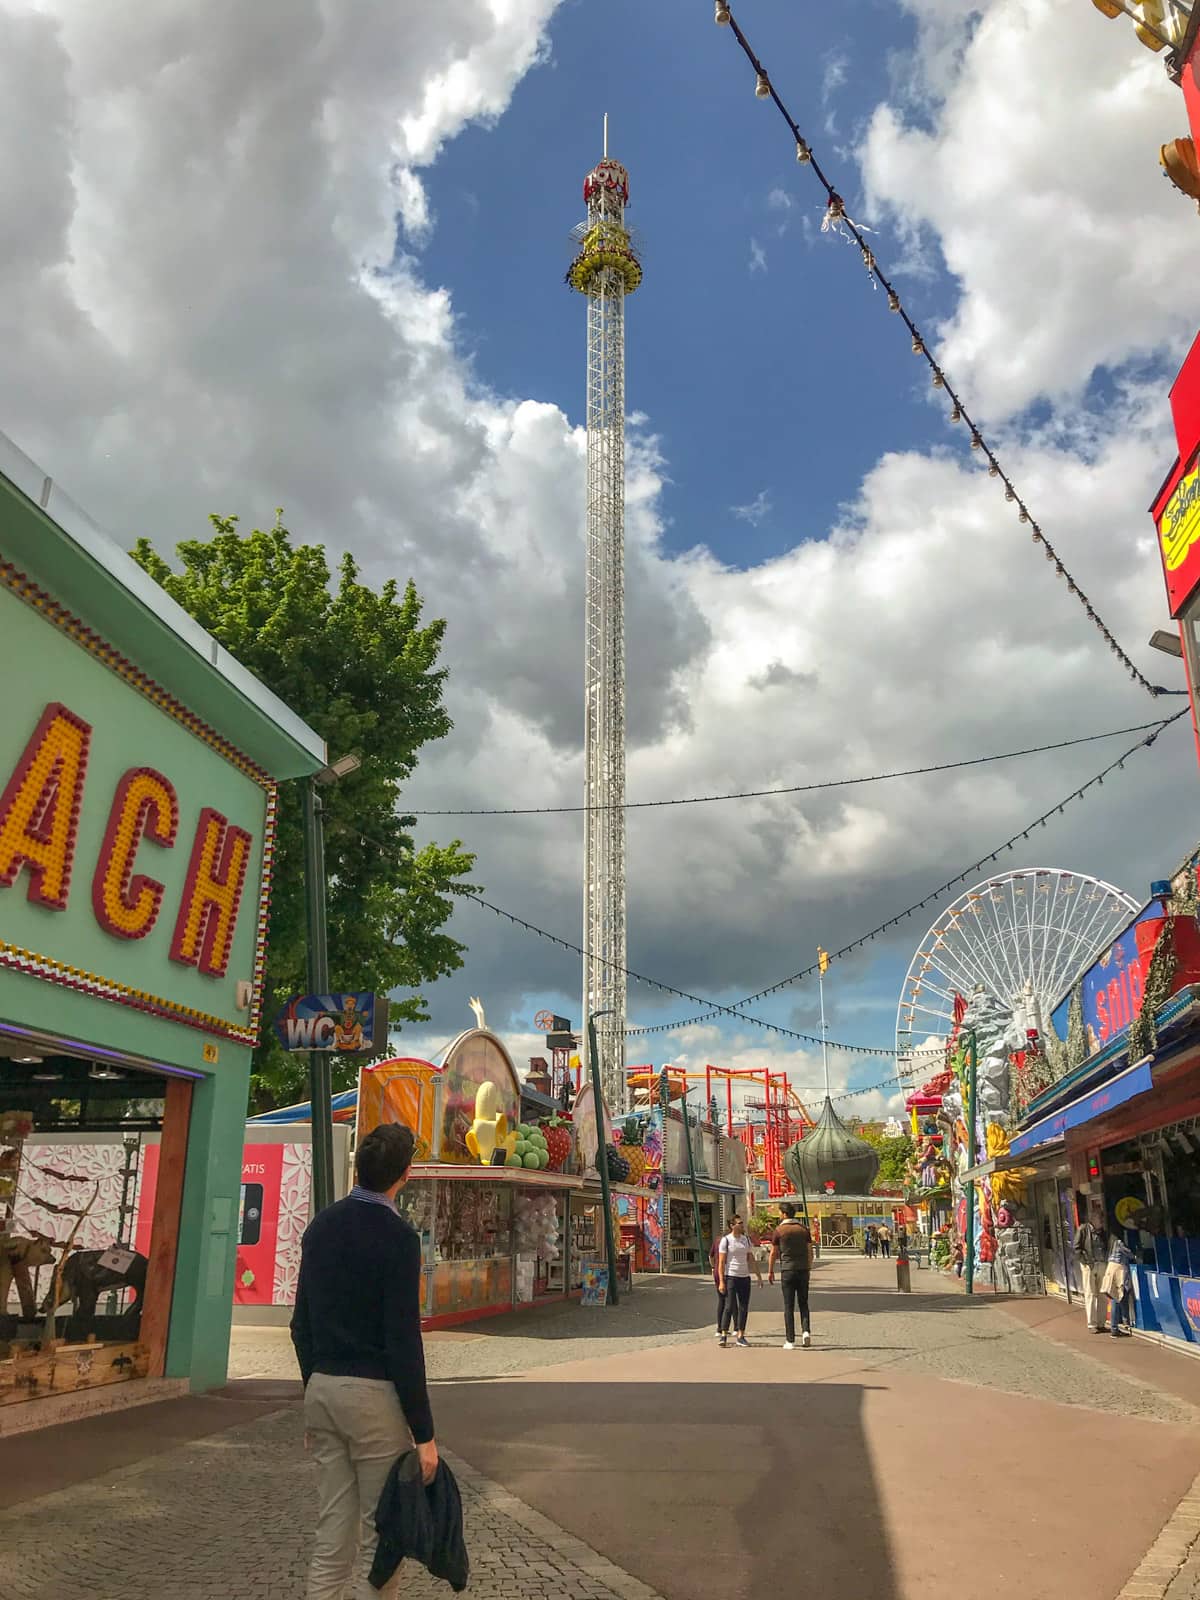 An amusement park during the day, with cables of lights across the way. There is a man in a dark jacket in the foreground, looking up at an attraction that is a tower with passengers experiencing a drop from the great height